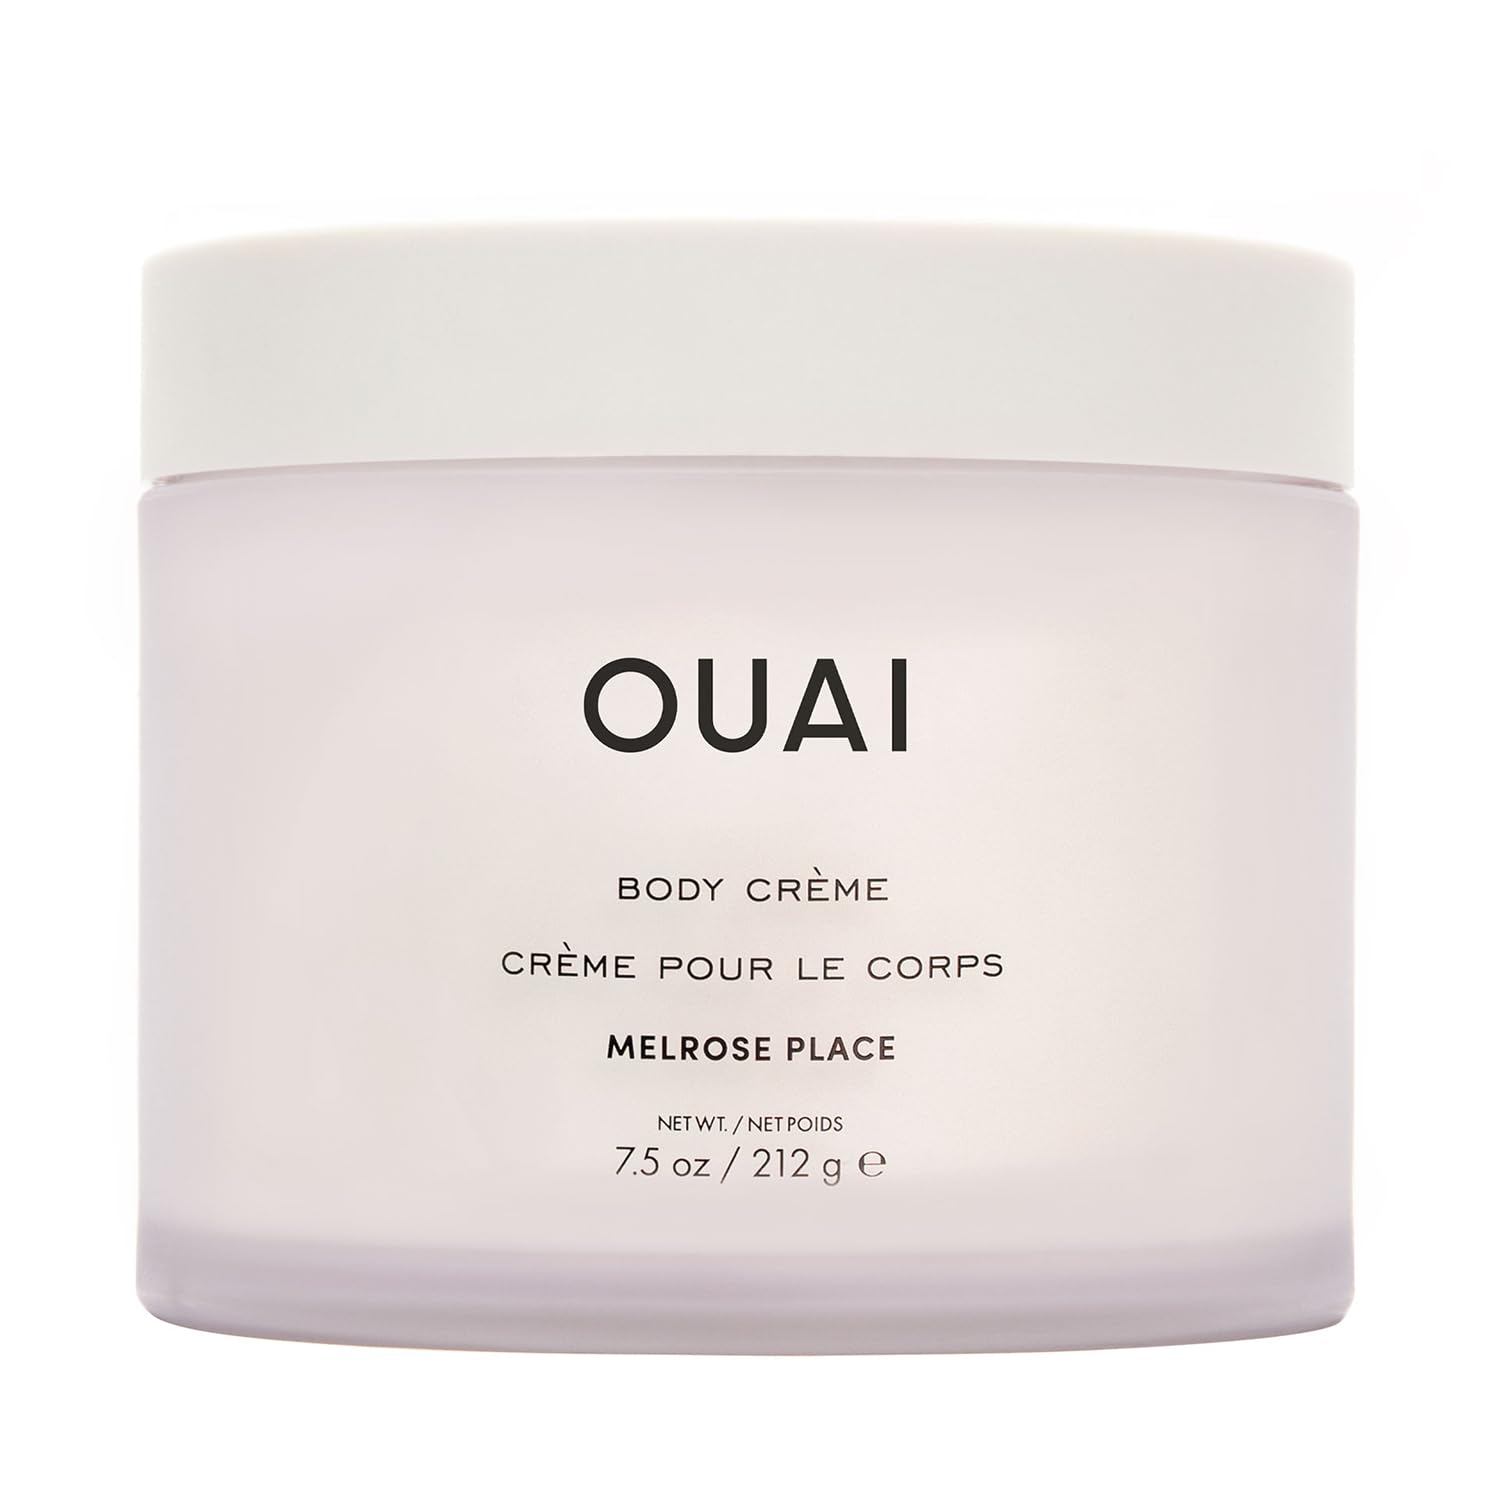 OUAI Body Cream, Melrose Place - Hydrating Whipped Body Cream with Cupuaçu Butter, Coconut Oil and Squalane - Softens Skin and Delivers Healthy-Looking Glow - Sulfate Free Skin Care - 7.5 Oz